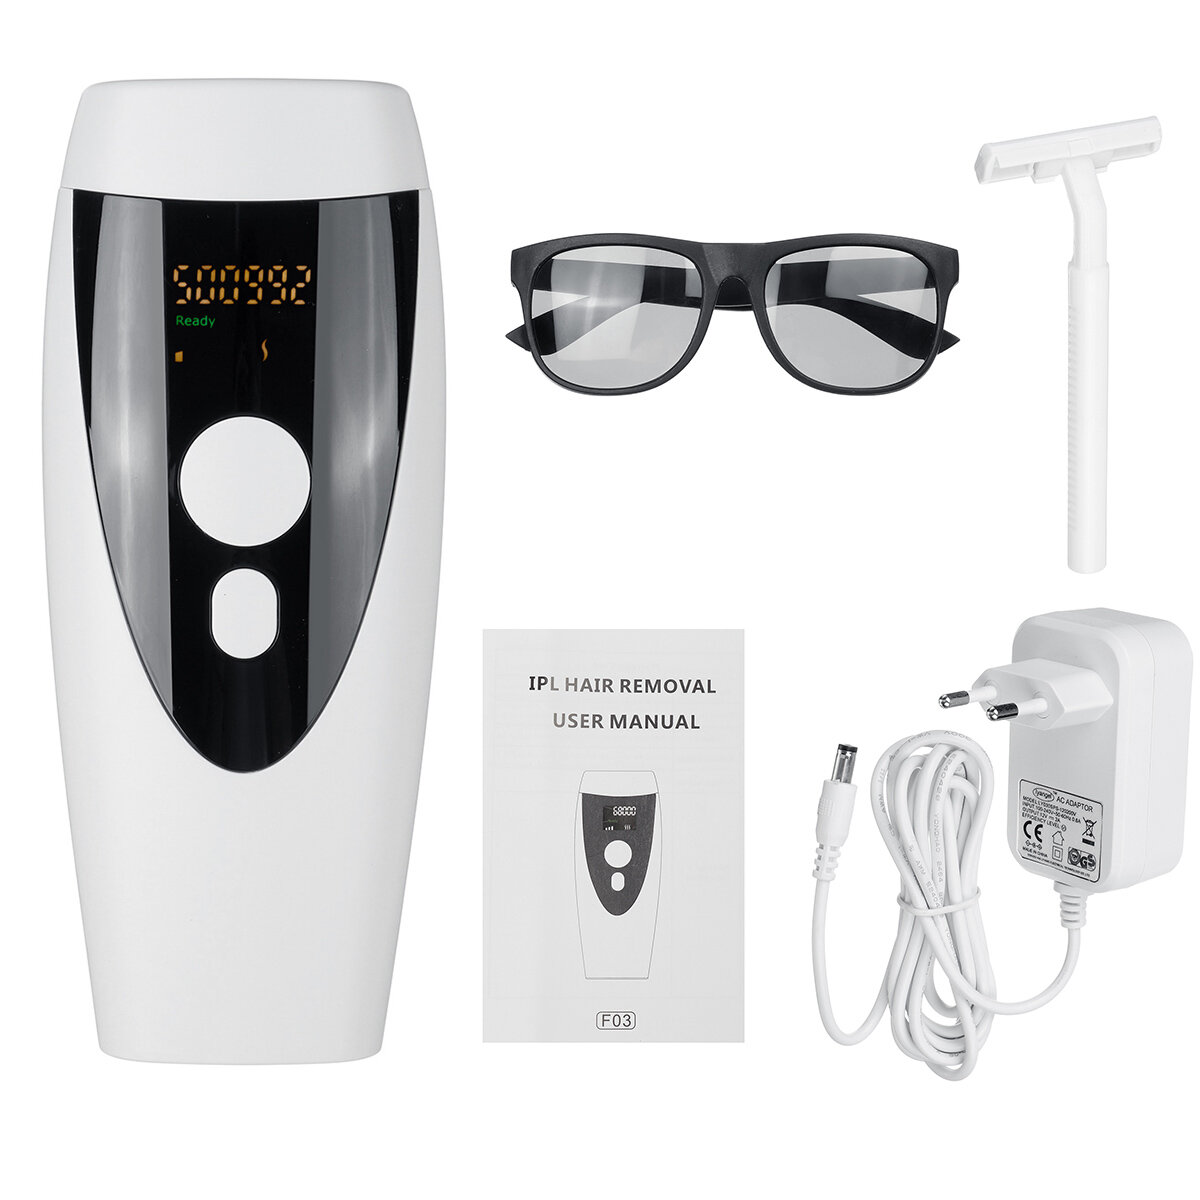 5 Gear Adjutable Hair Remover 500,000 Flashes Display Laser Hair Removal Epilator Painless Body Hair Removal